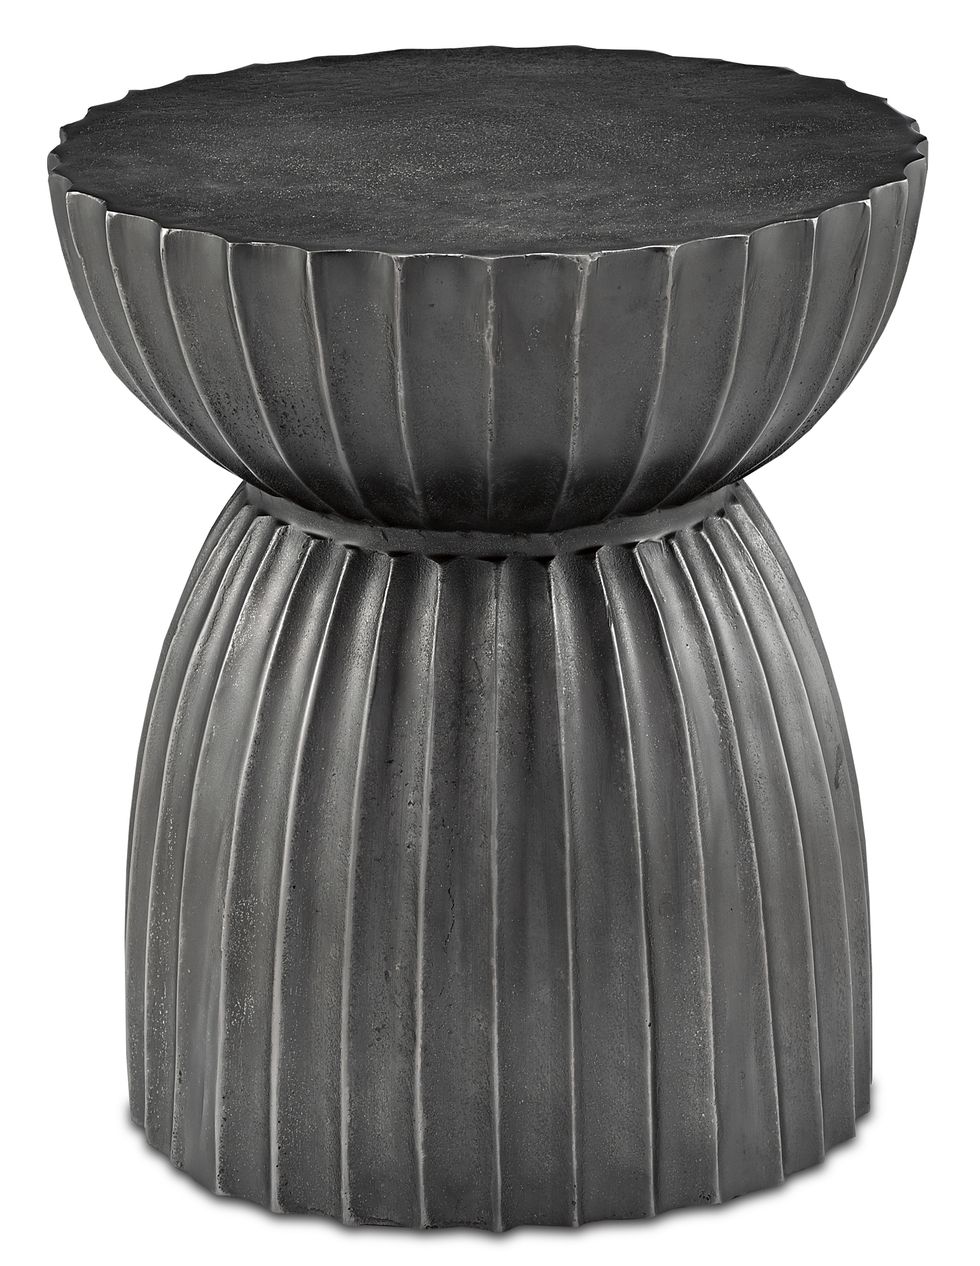 Rasi Graphite Table/Stool by Currey and Company